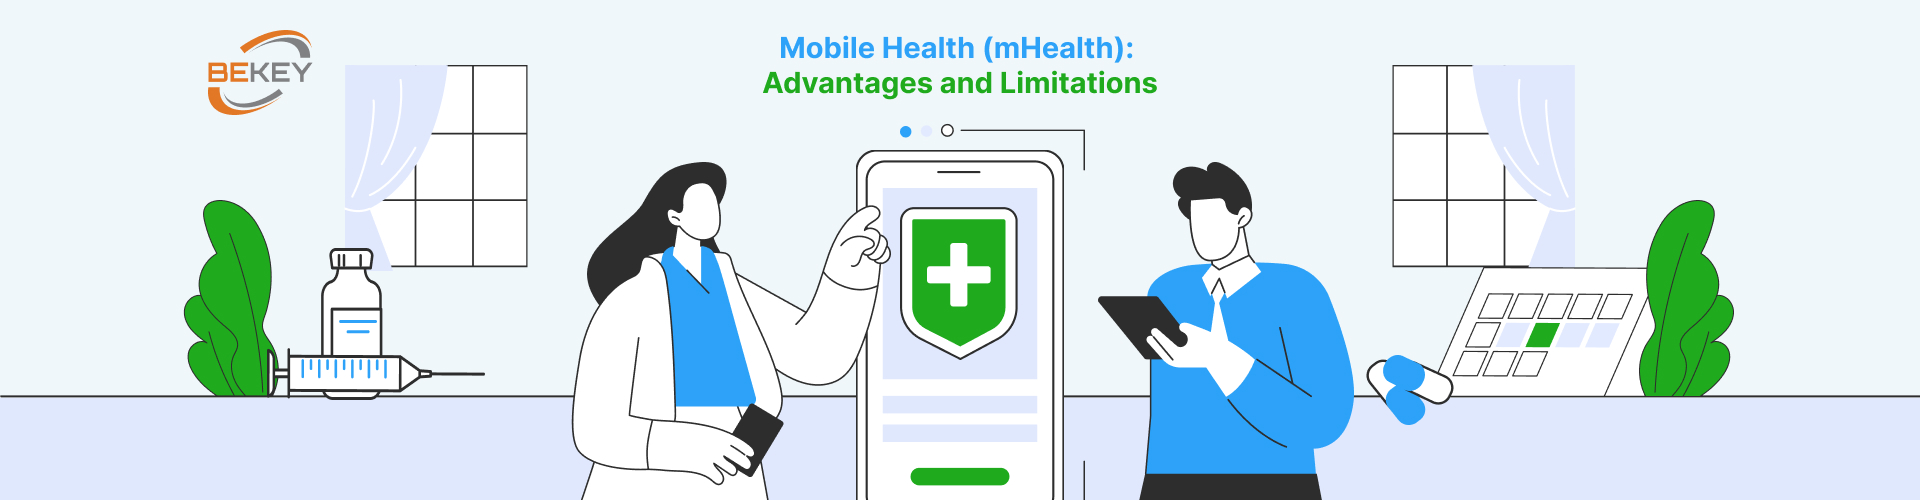 Mobile Health (mHealth): Advantages and Limitations - image